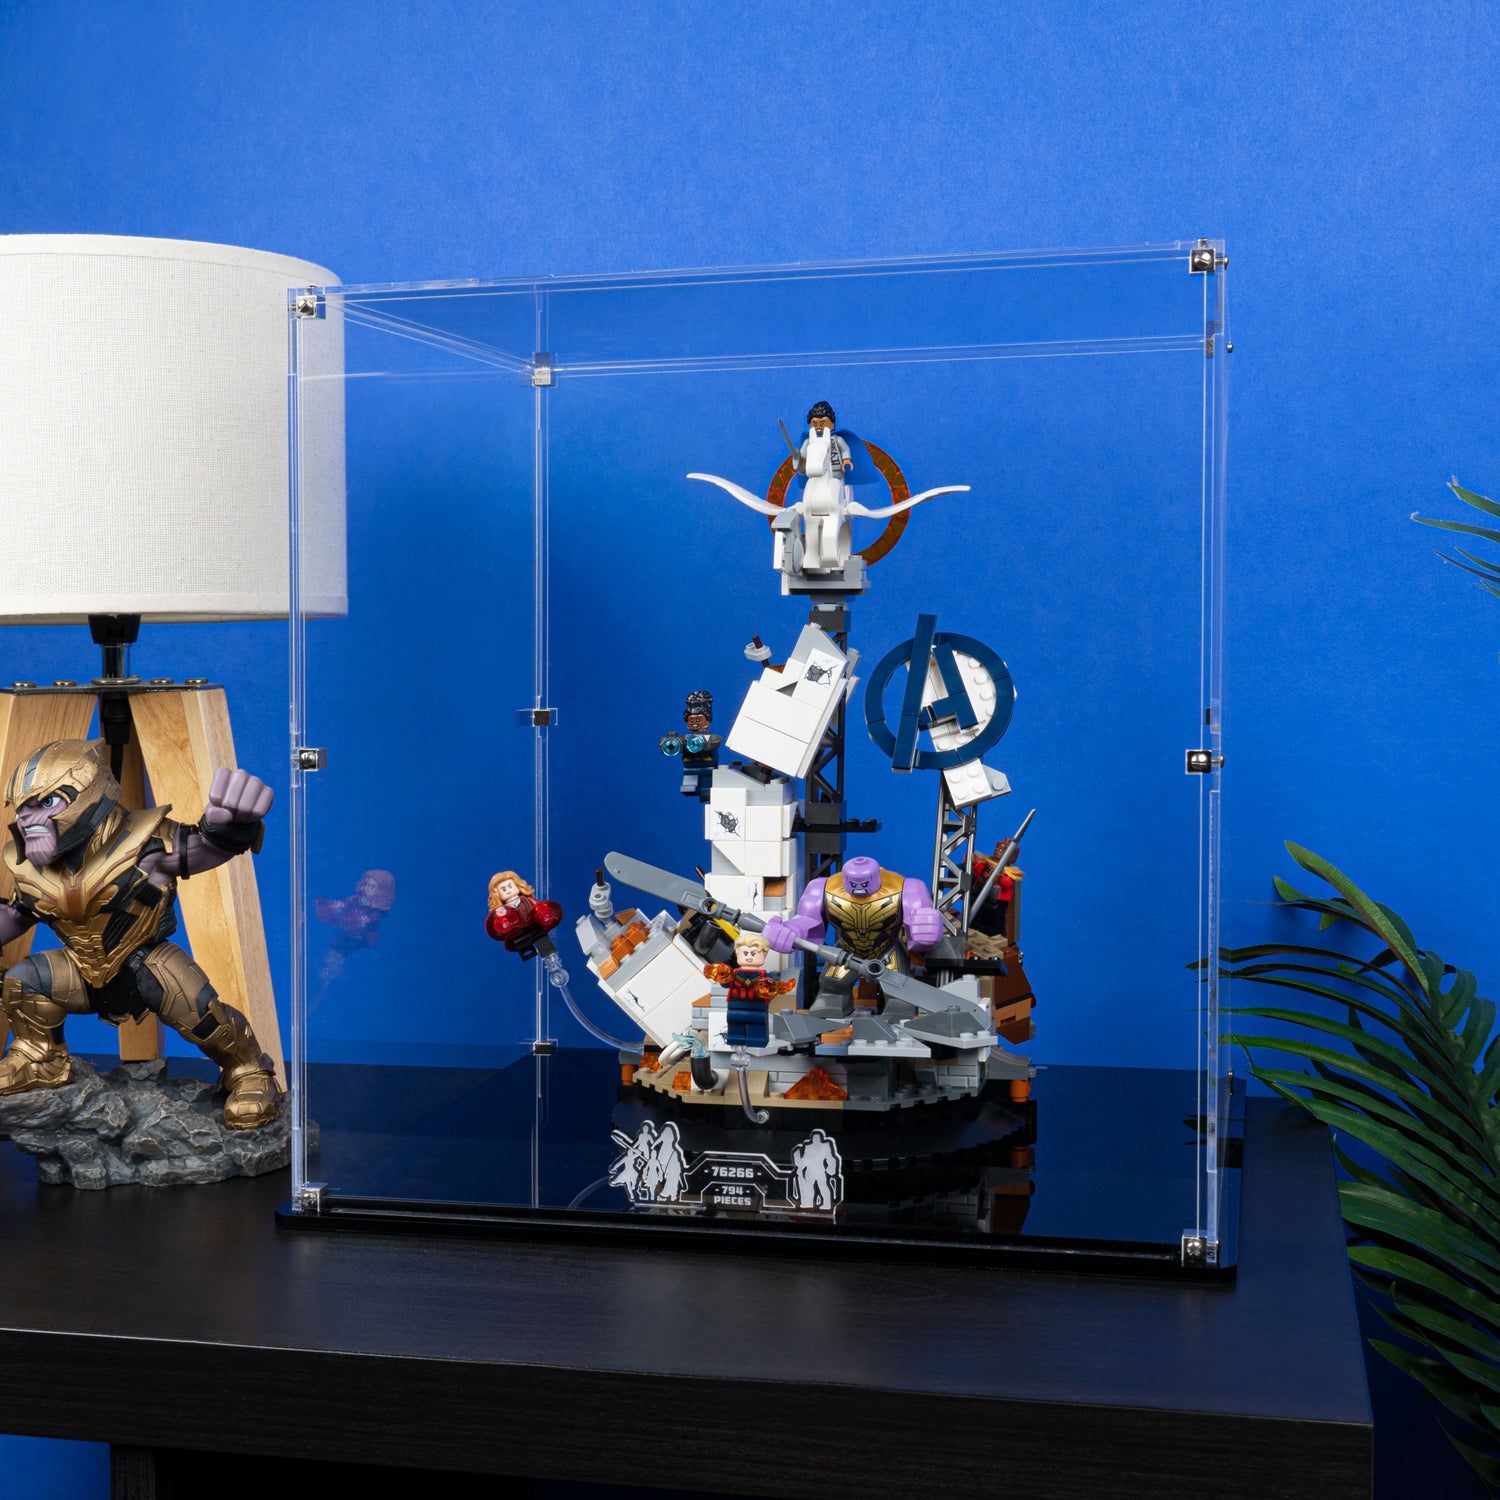 Protect this iconic scene with our crystal clear Acrylic display case